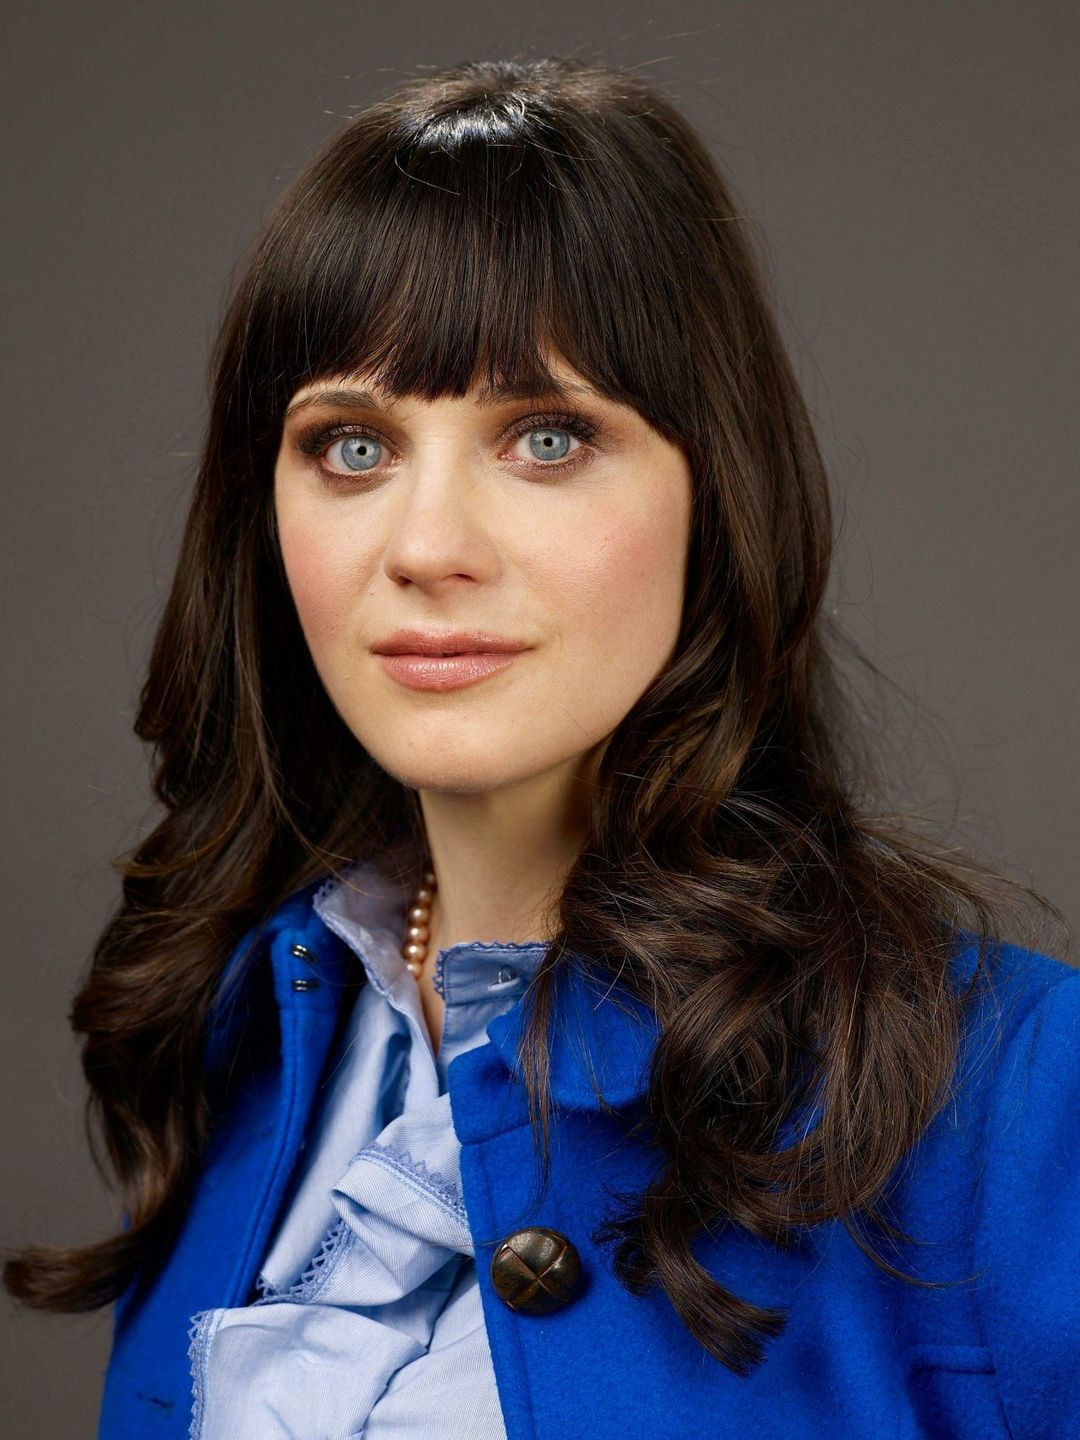 Zooey Deschanel does she have kids